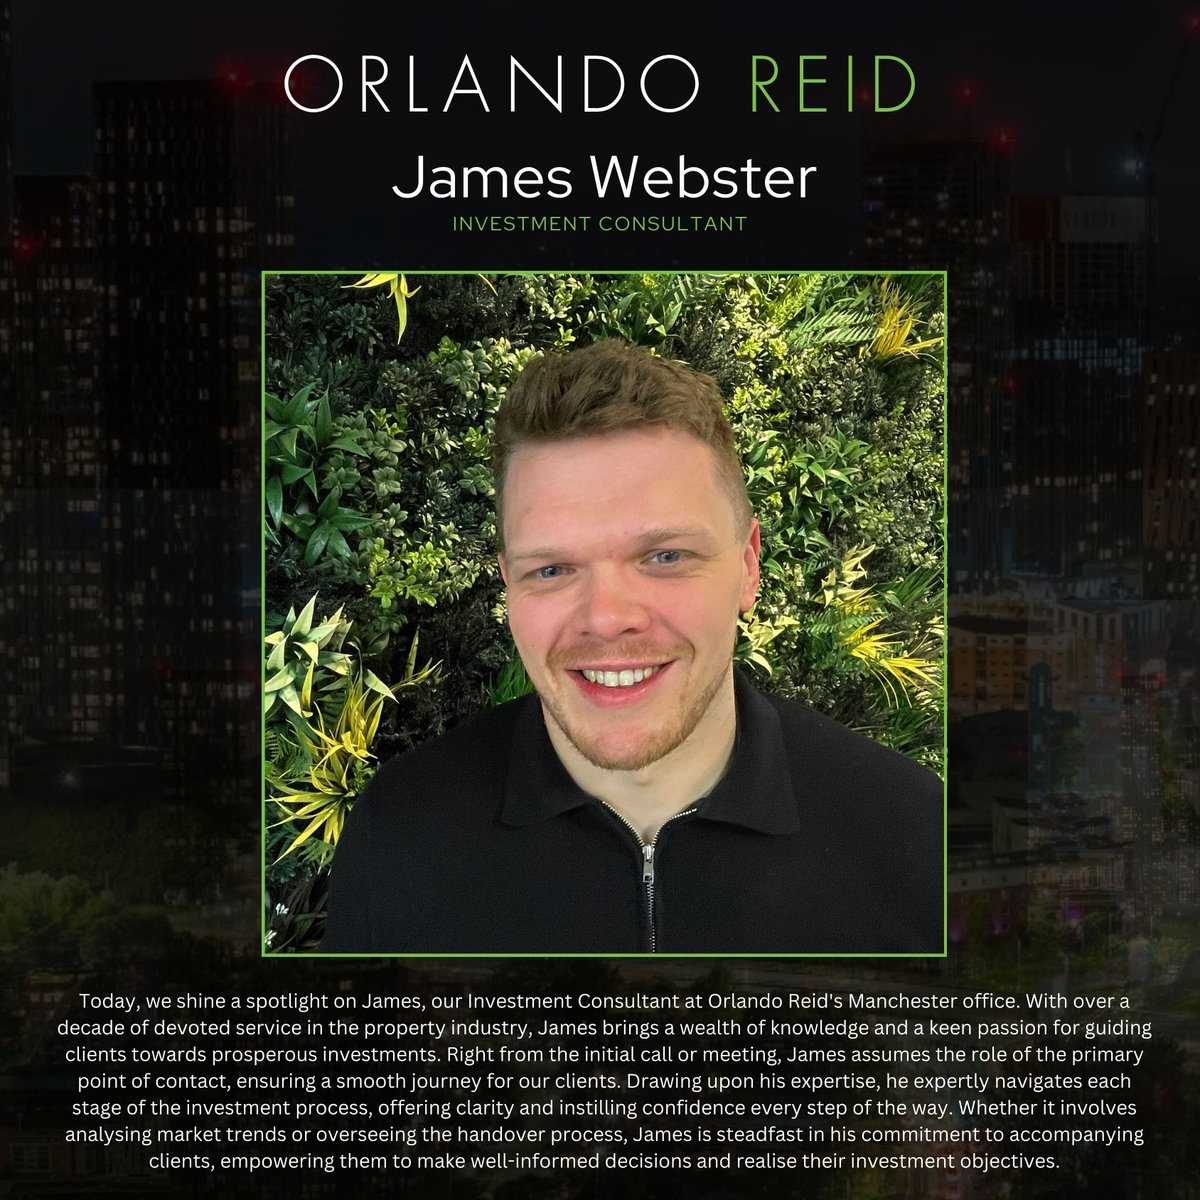 MEET THE TEAM MONDAYS! 🌟

Today, we shine a spotlight on James, our Investment Consultant at Orlando Reid's Manchester office. James assumes the role of the primary point of contact, ensuring a smooth journey for our clients.

#MeetTheTeamMondays #InvestmentConsultant